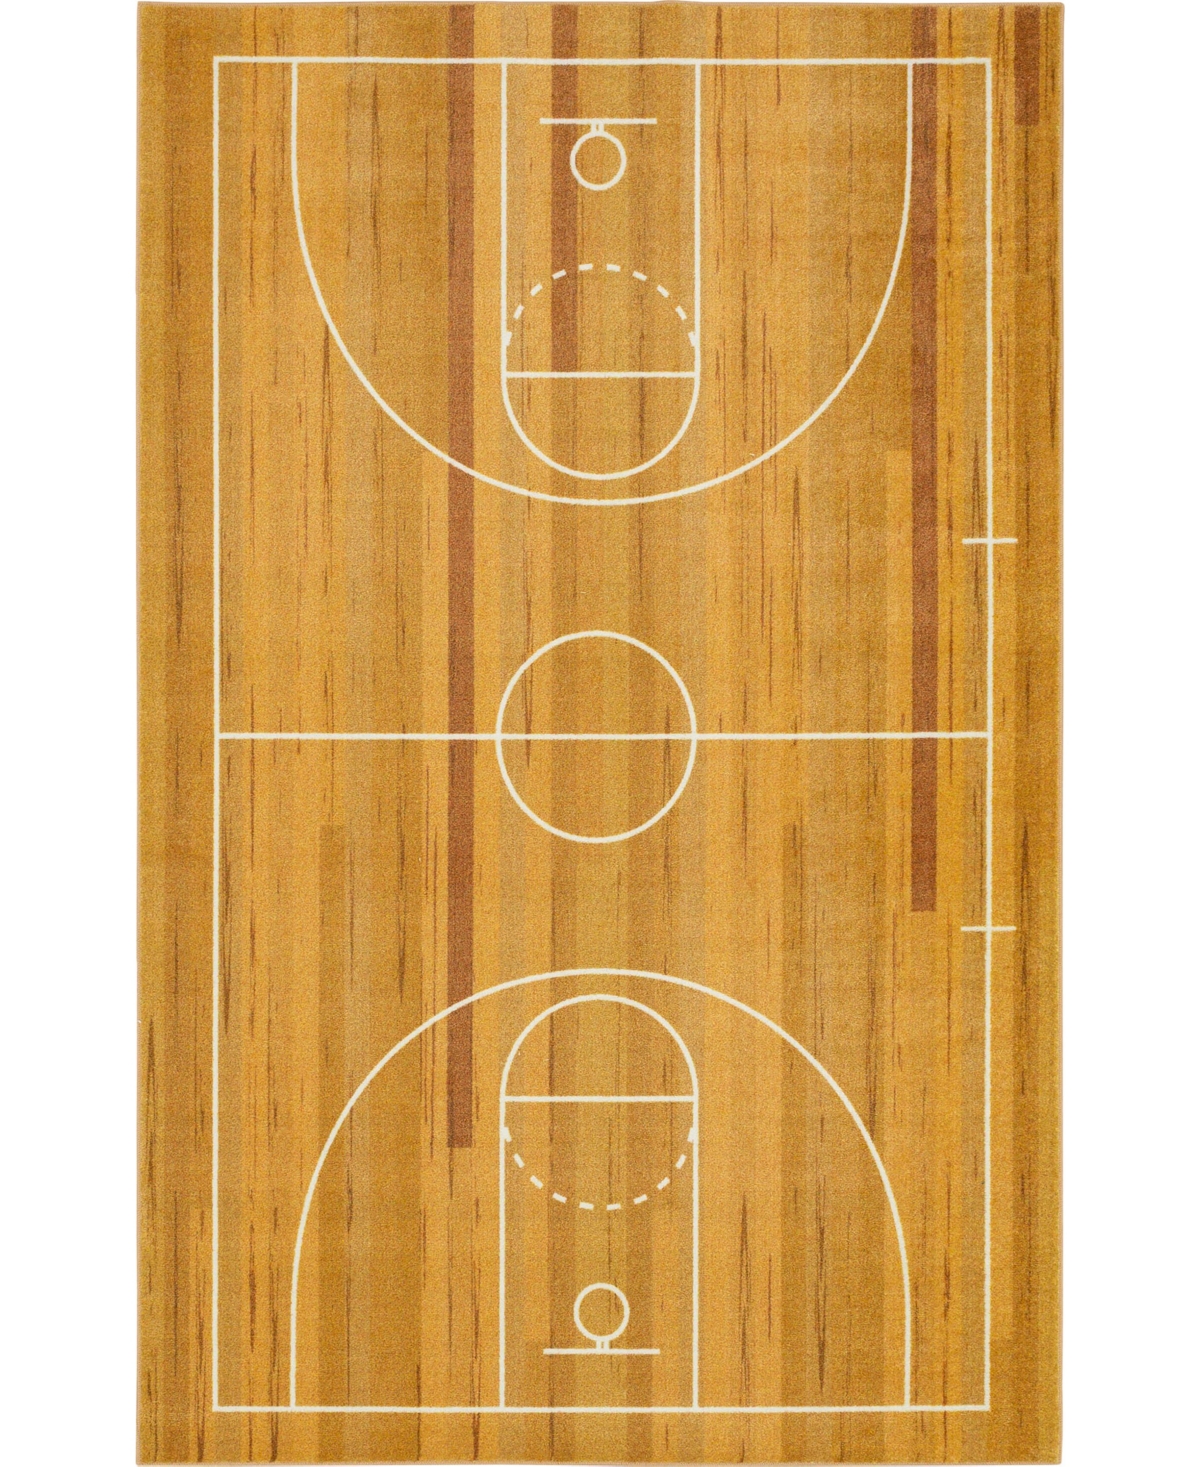 Mohawk Prismatic Basketball Court Kids Rug 8' X 10' Area Rug In Brown